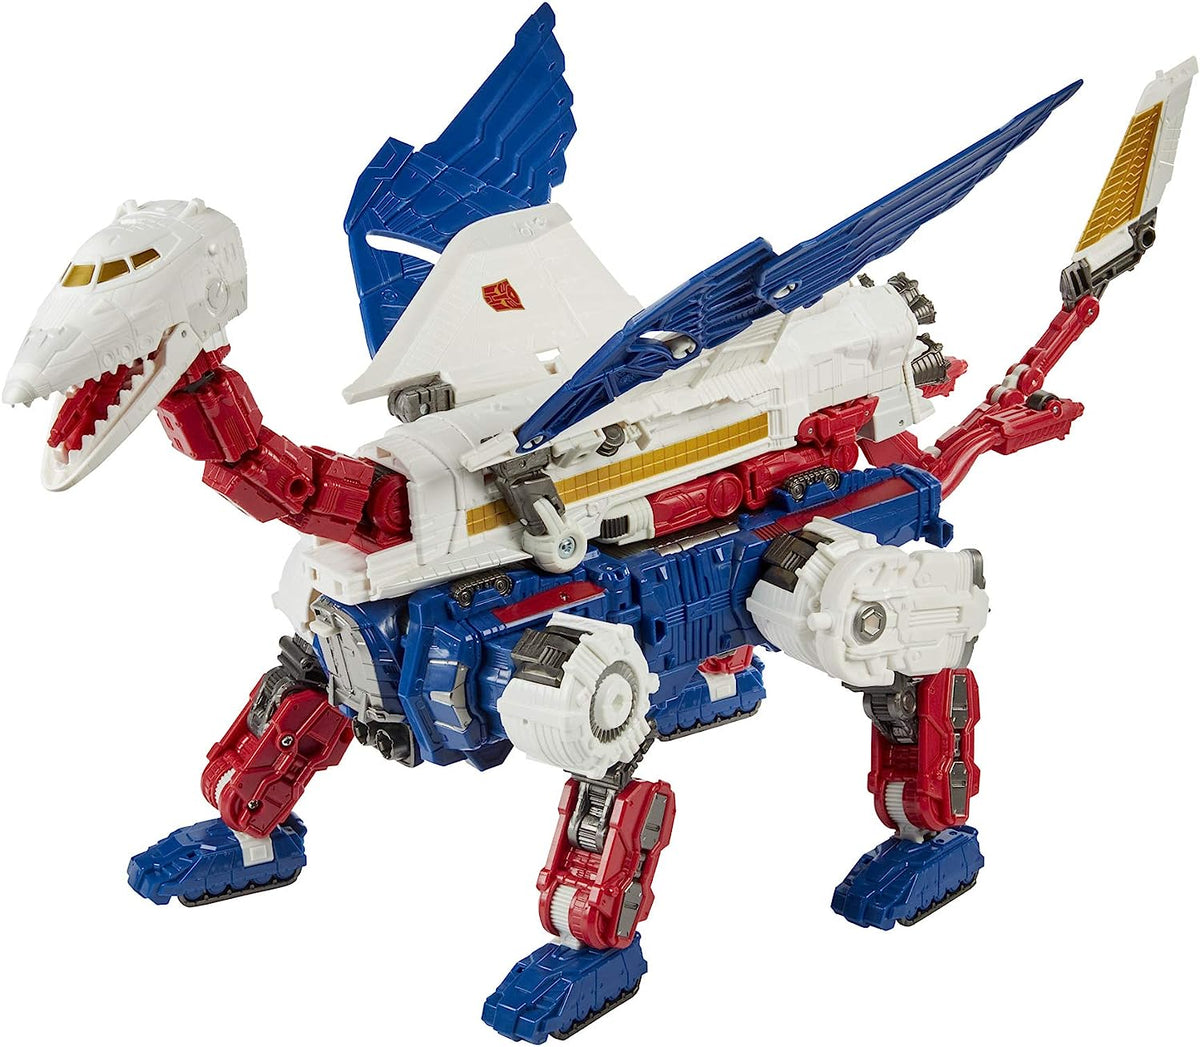 Transformers Toys Generations War for Cybertron: Earthrise Leader WFC-E24 Sky Lynx (5 Modes)